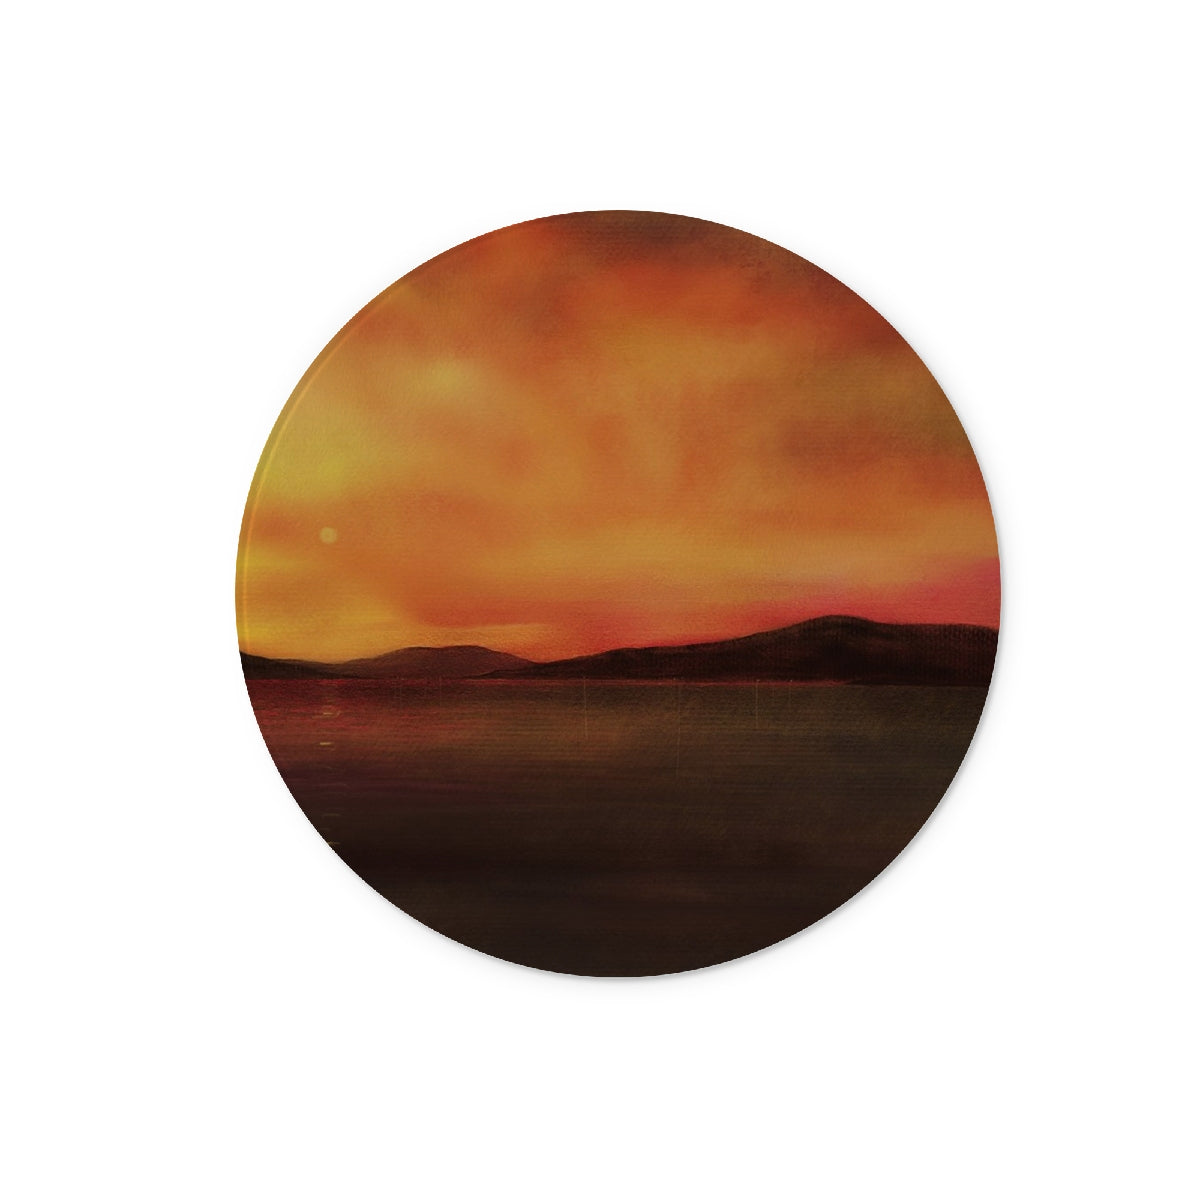 Harris Sunset Art Gifts Glass Chopping Board-Glass Chopping Boards-Hebridean Islands Art Gallery-12" Round-Paintings, Prints, Homeware, Art Gifts From Scotland By Scottish Artist Kevin Hunter